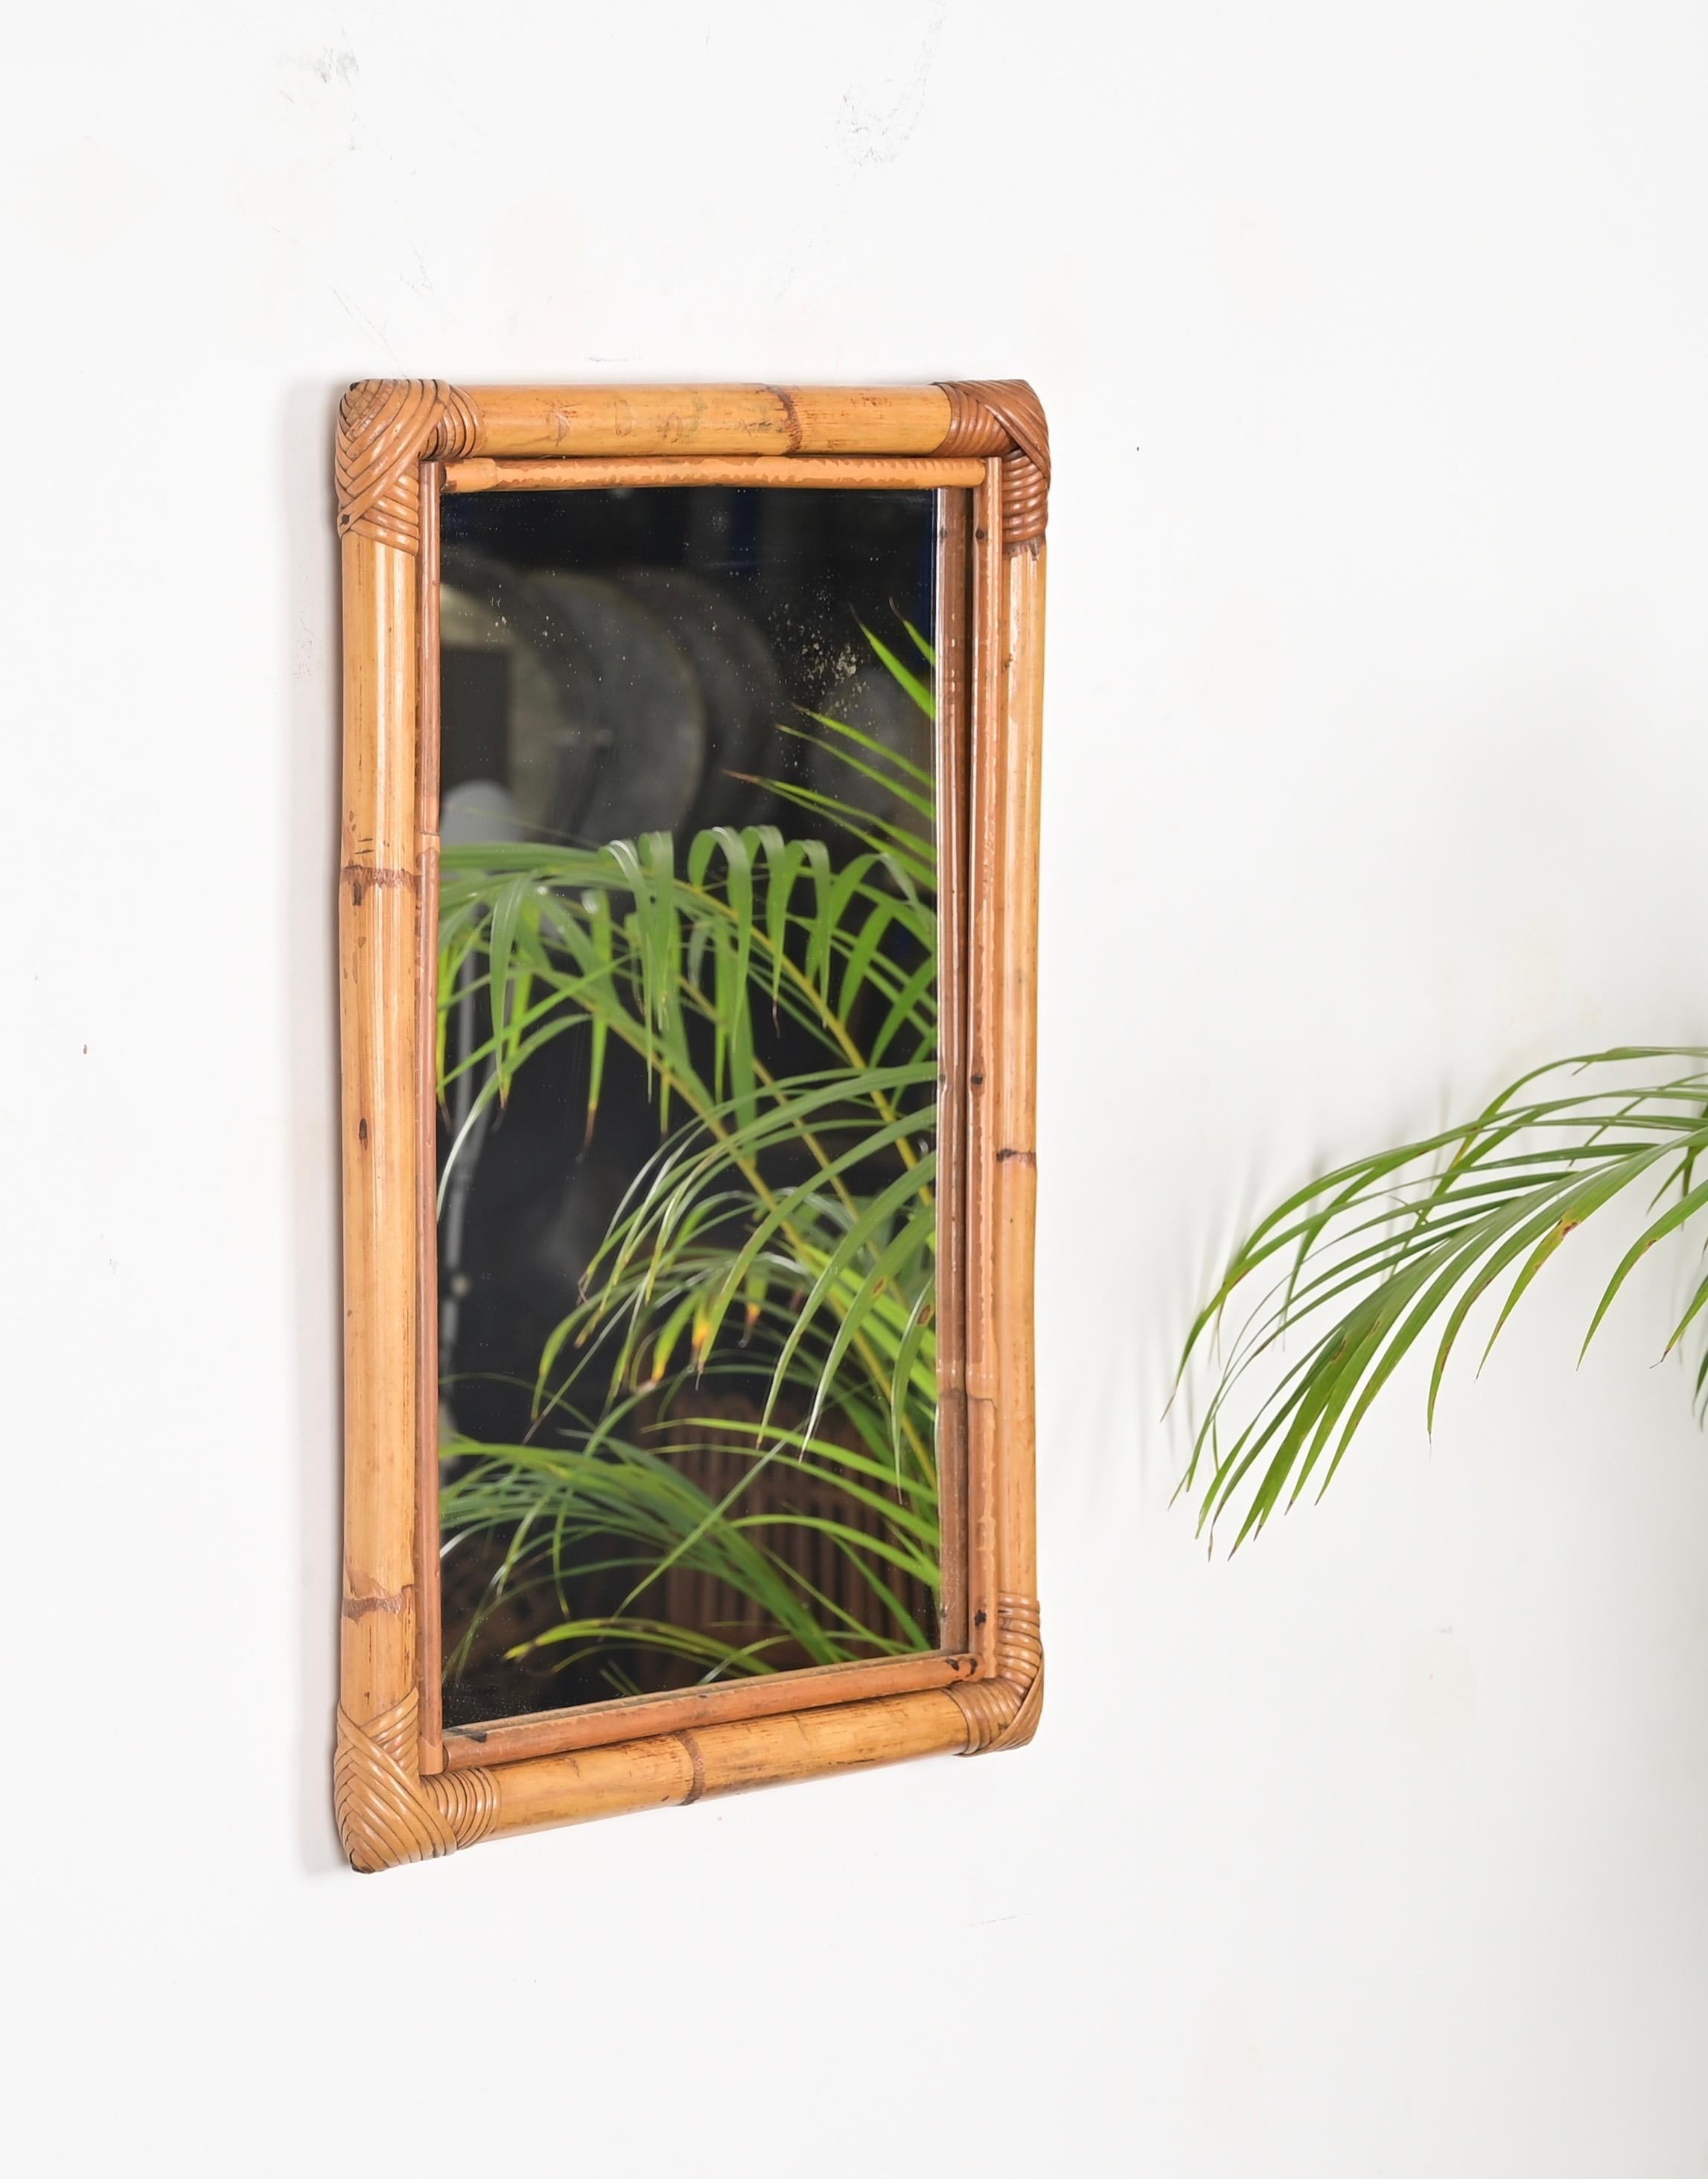 Gorgeous Mid-Century rectangular mirror in bamboo and hand-woven rattan wicker. This lovely French Riviera style mirror was hand-made in Italy during the 1970s.

This organic mirror is in amazing conditions, it features a double frame in bamboo